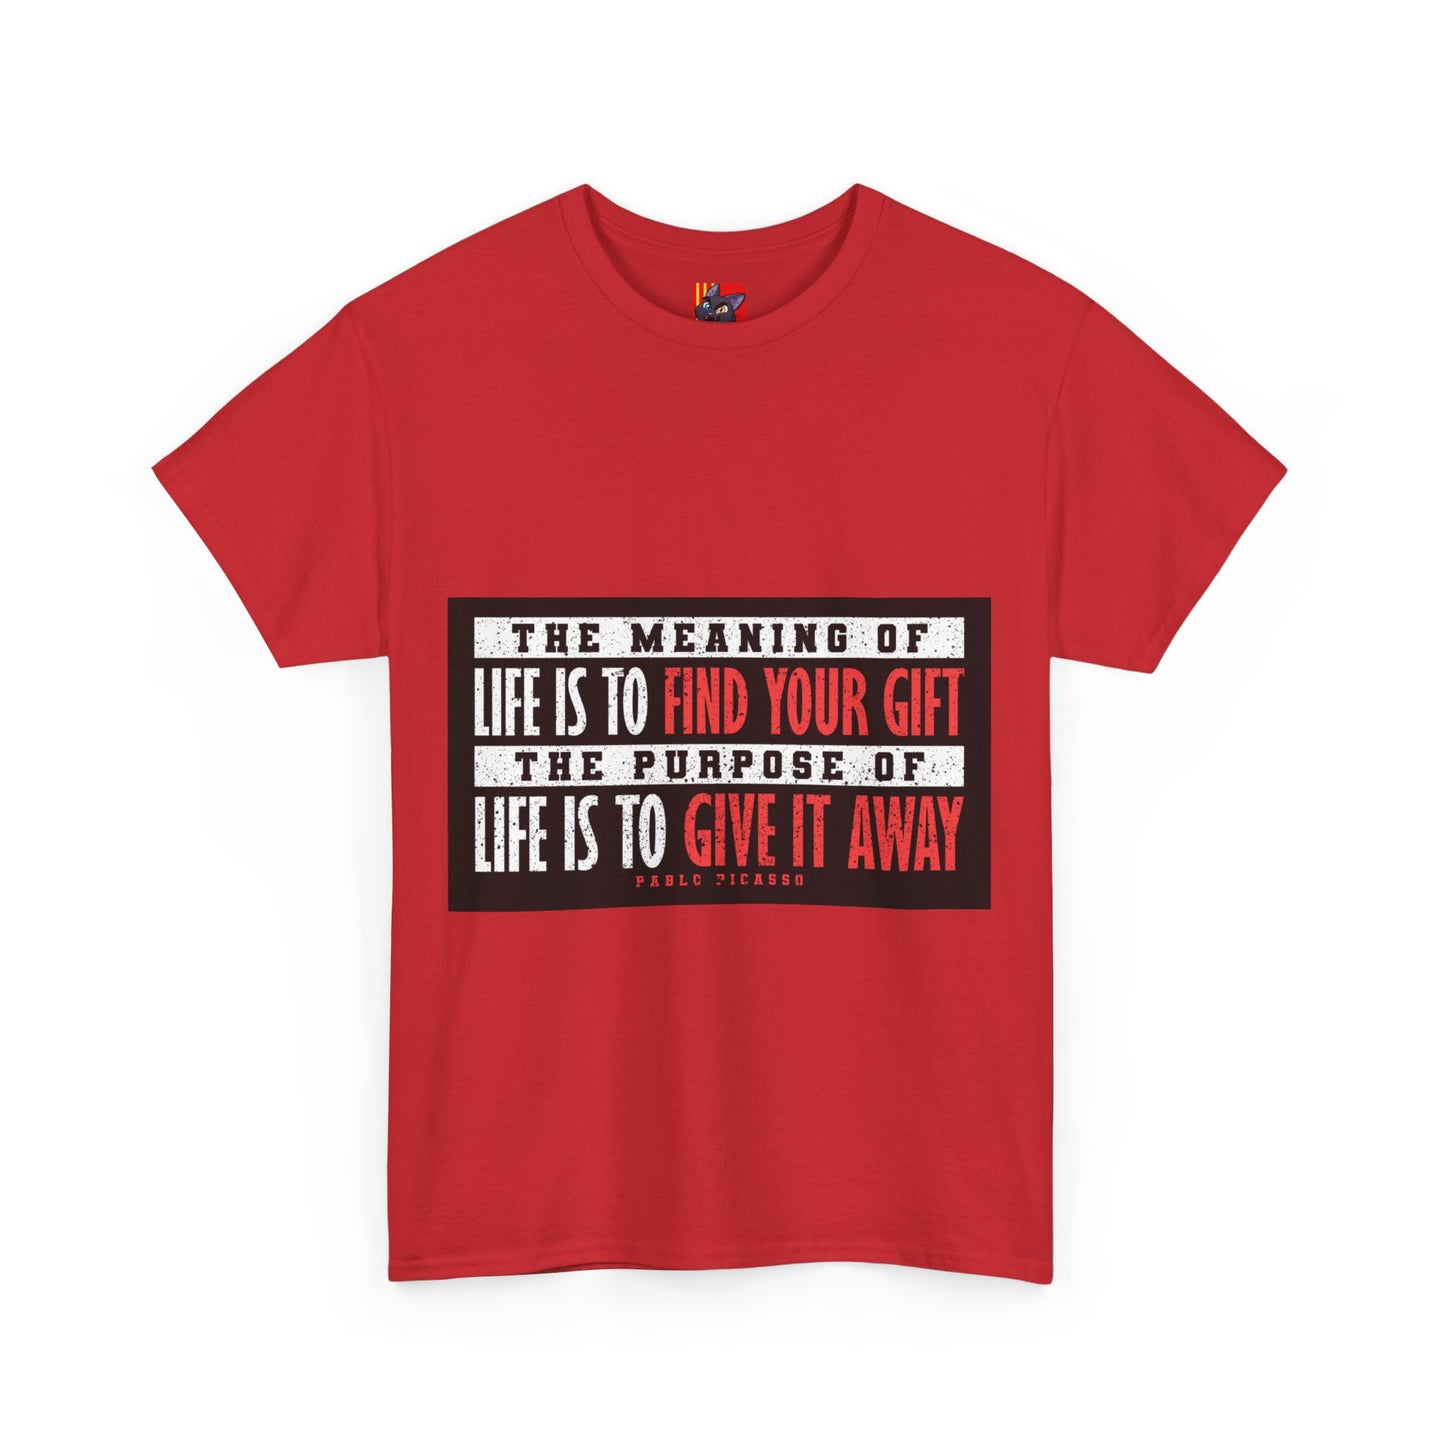 The Freedom Fighter T-Shirt: The meaning of life to find your gift the purpose